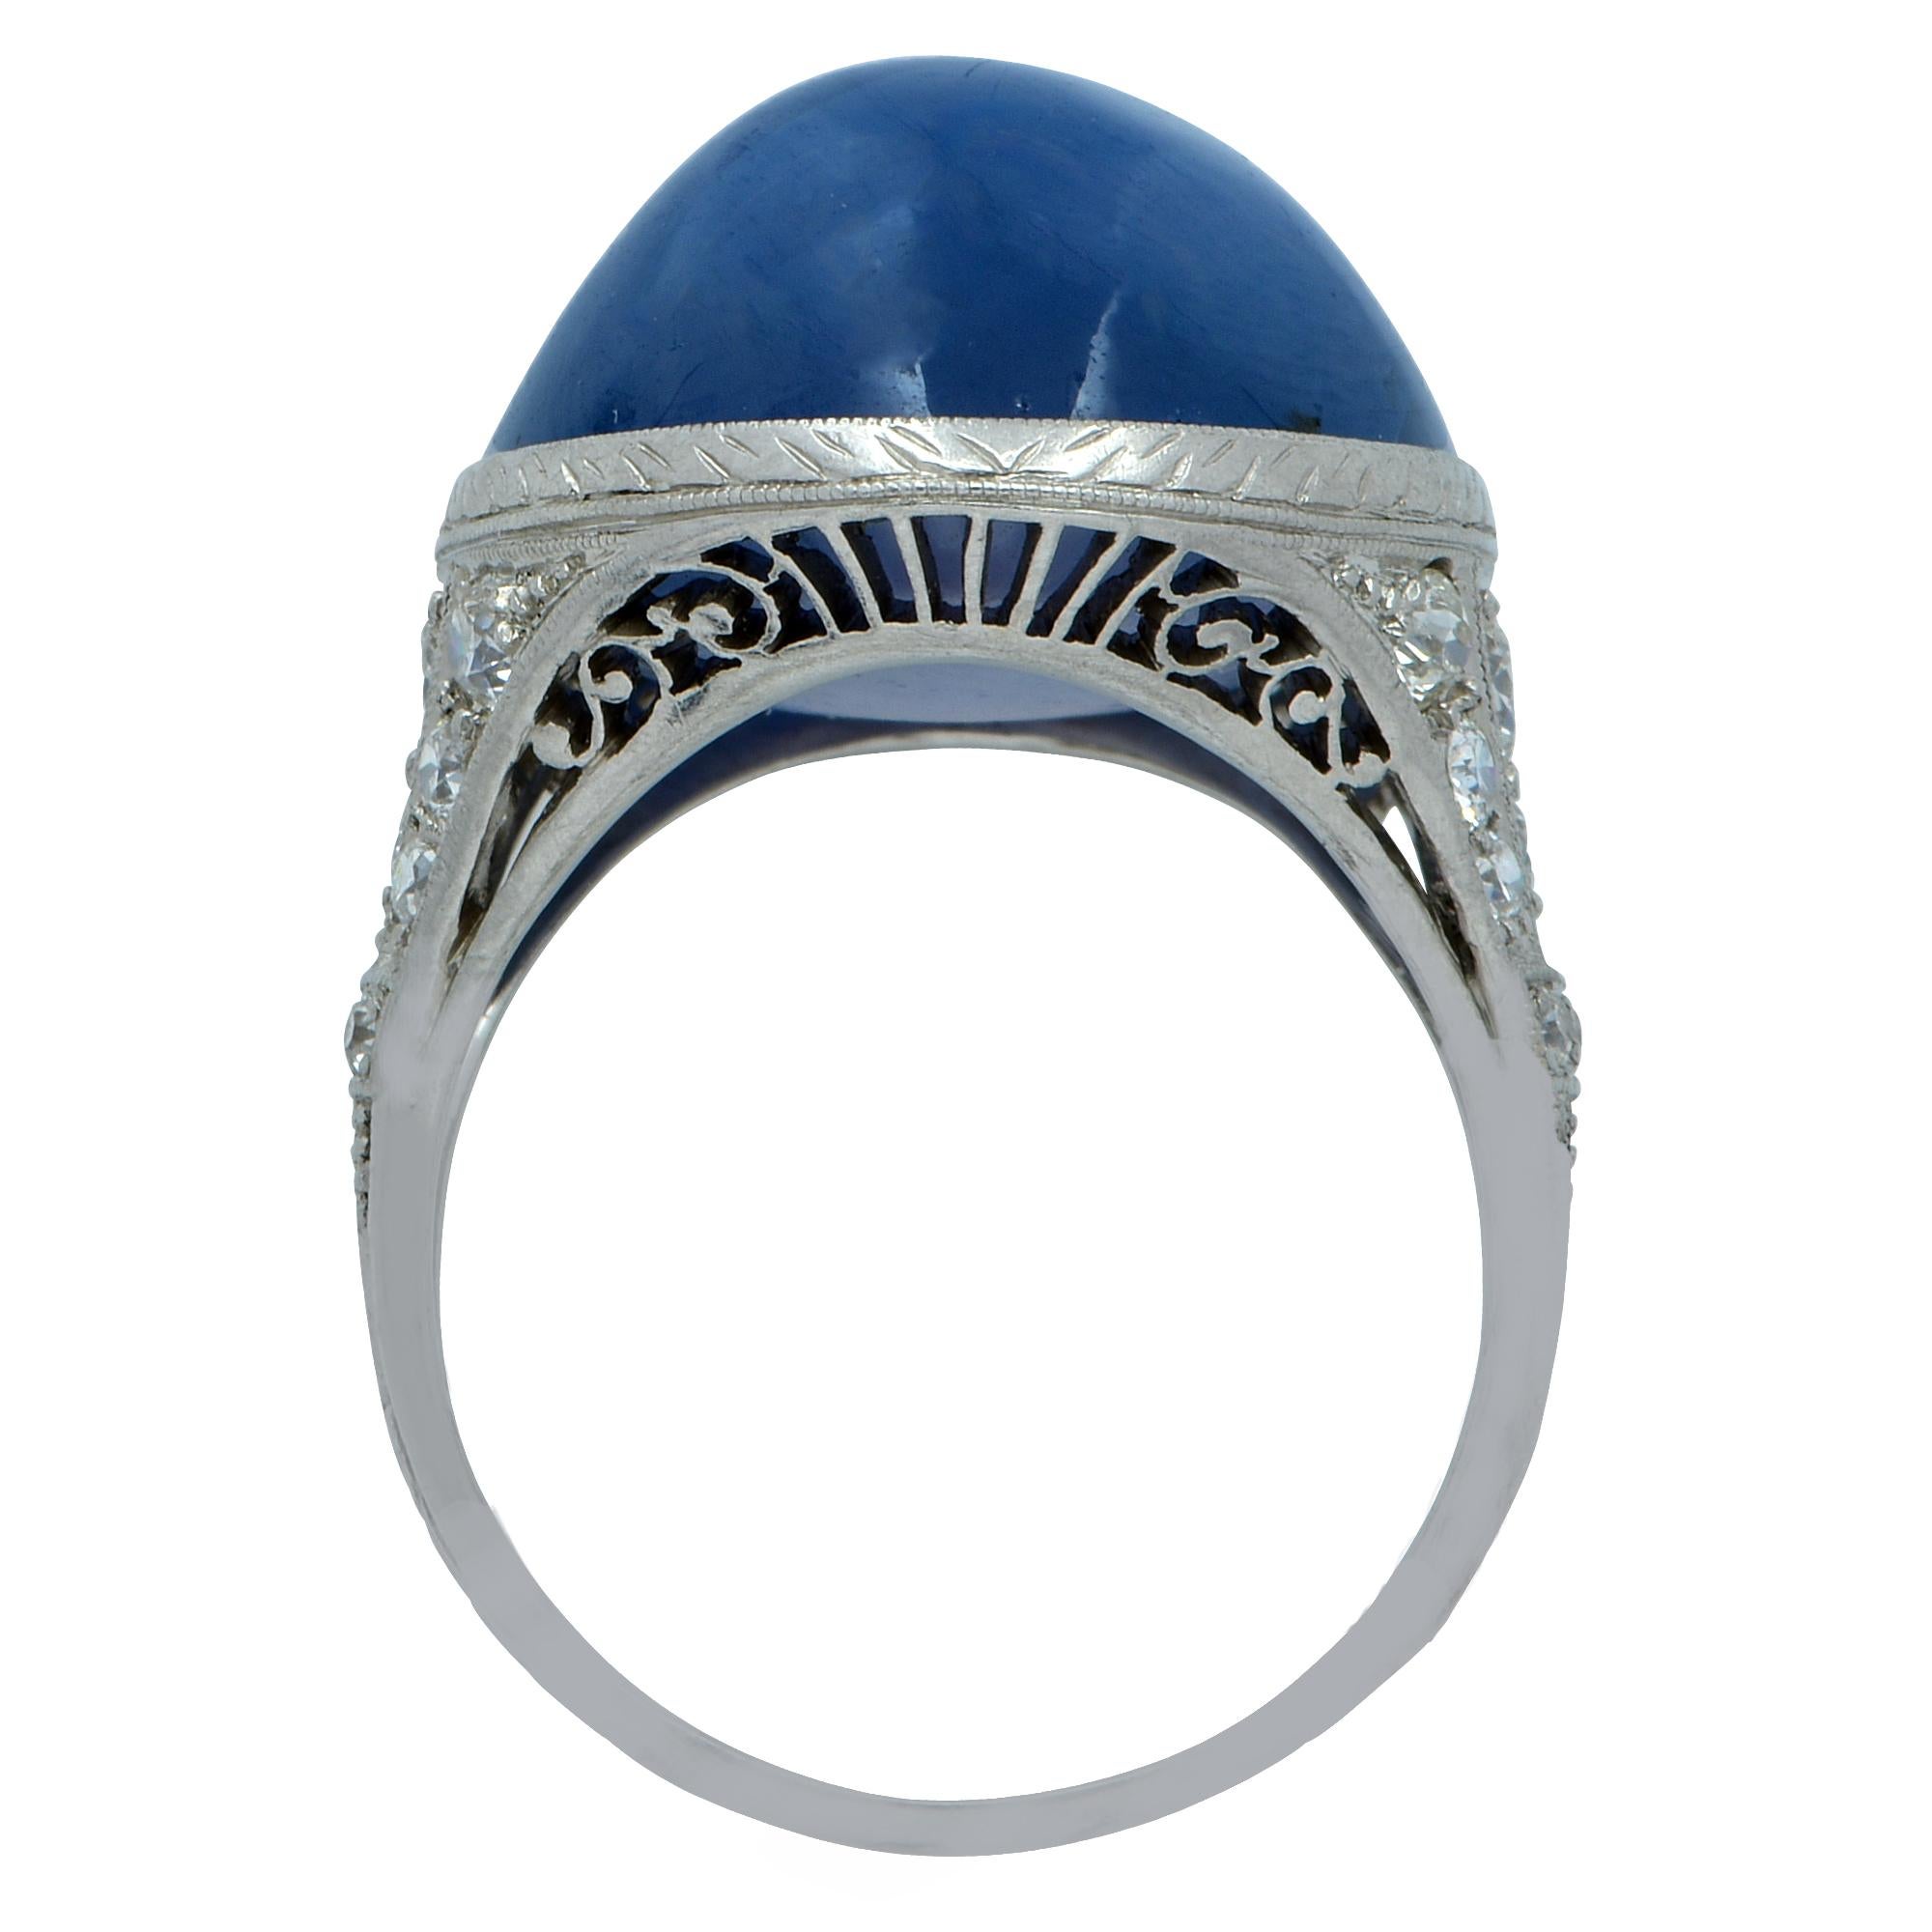 Captivating handmade platinum ring by Raymond Yard featuring an alluring 20 carat star cabochon sapphire, accented by 22 round brilliant cut diamonds weighing approximately .75 carats. This intriguing sapphire is the most magnificent blue. The stone